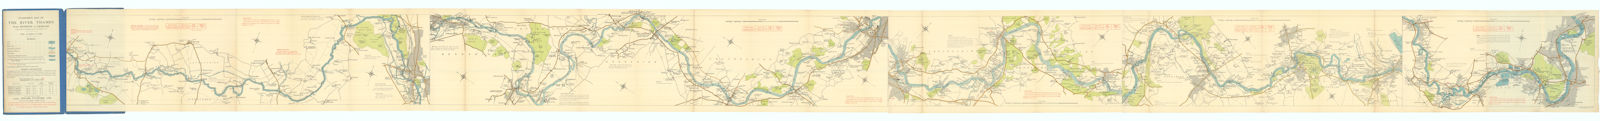 Stanford's map of the River Thames. 112x8cm Leporello map 1957 old vintage